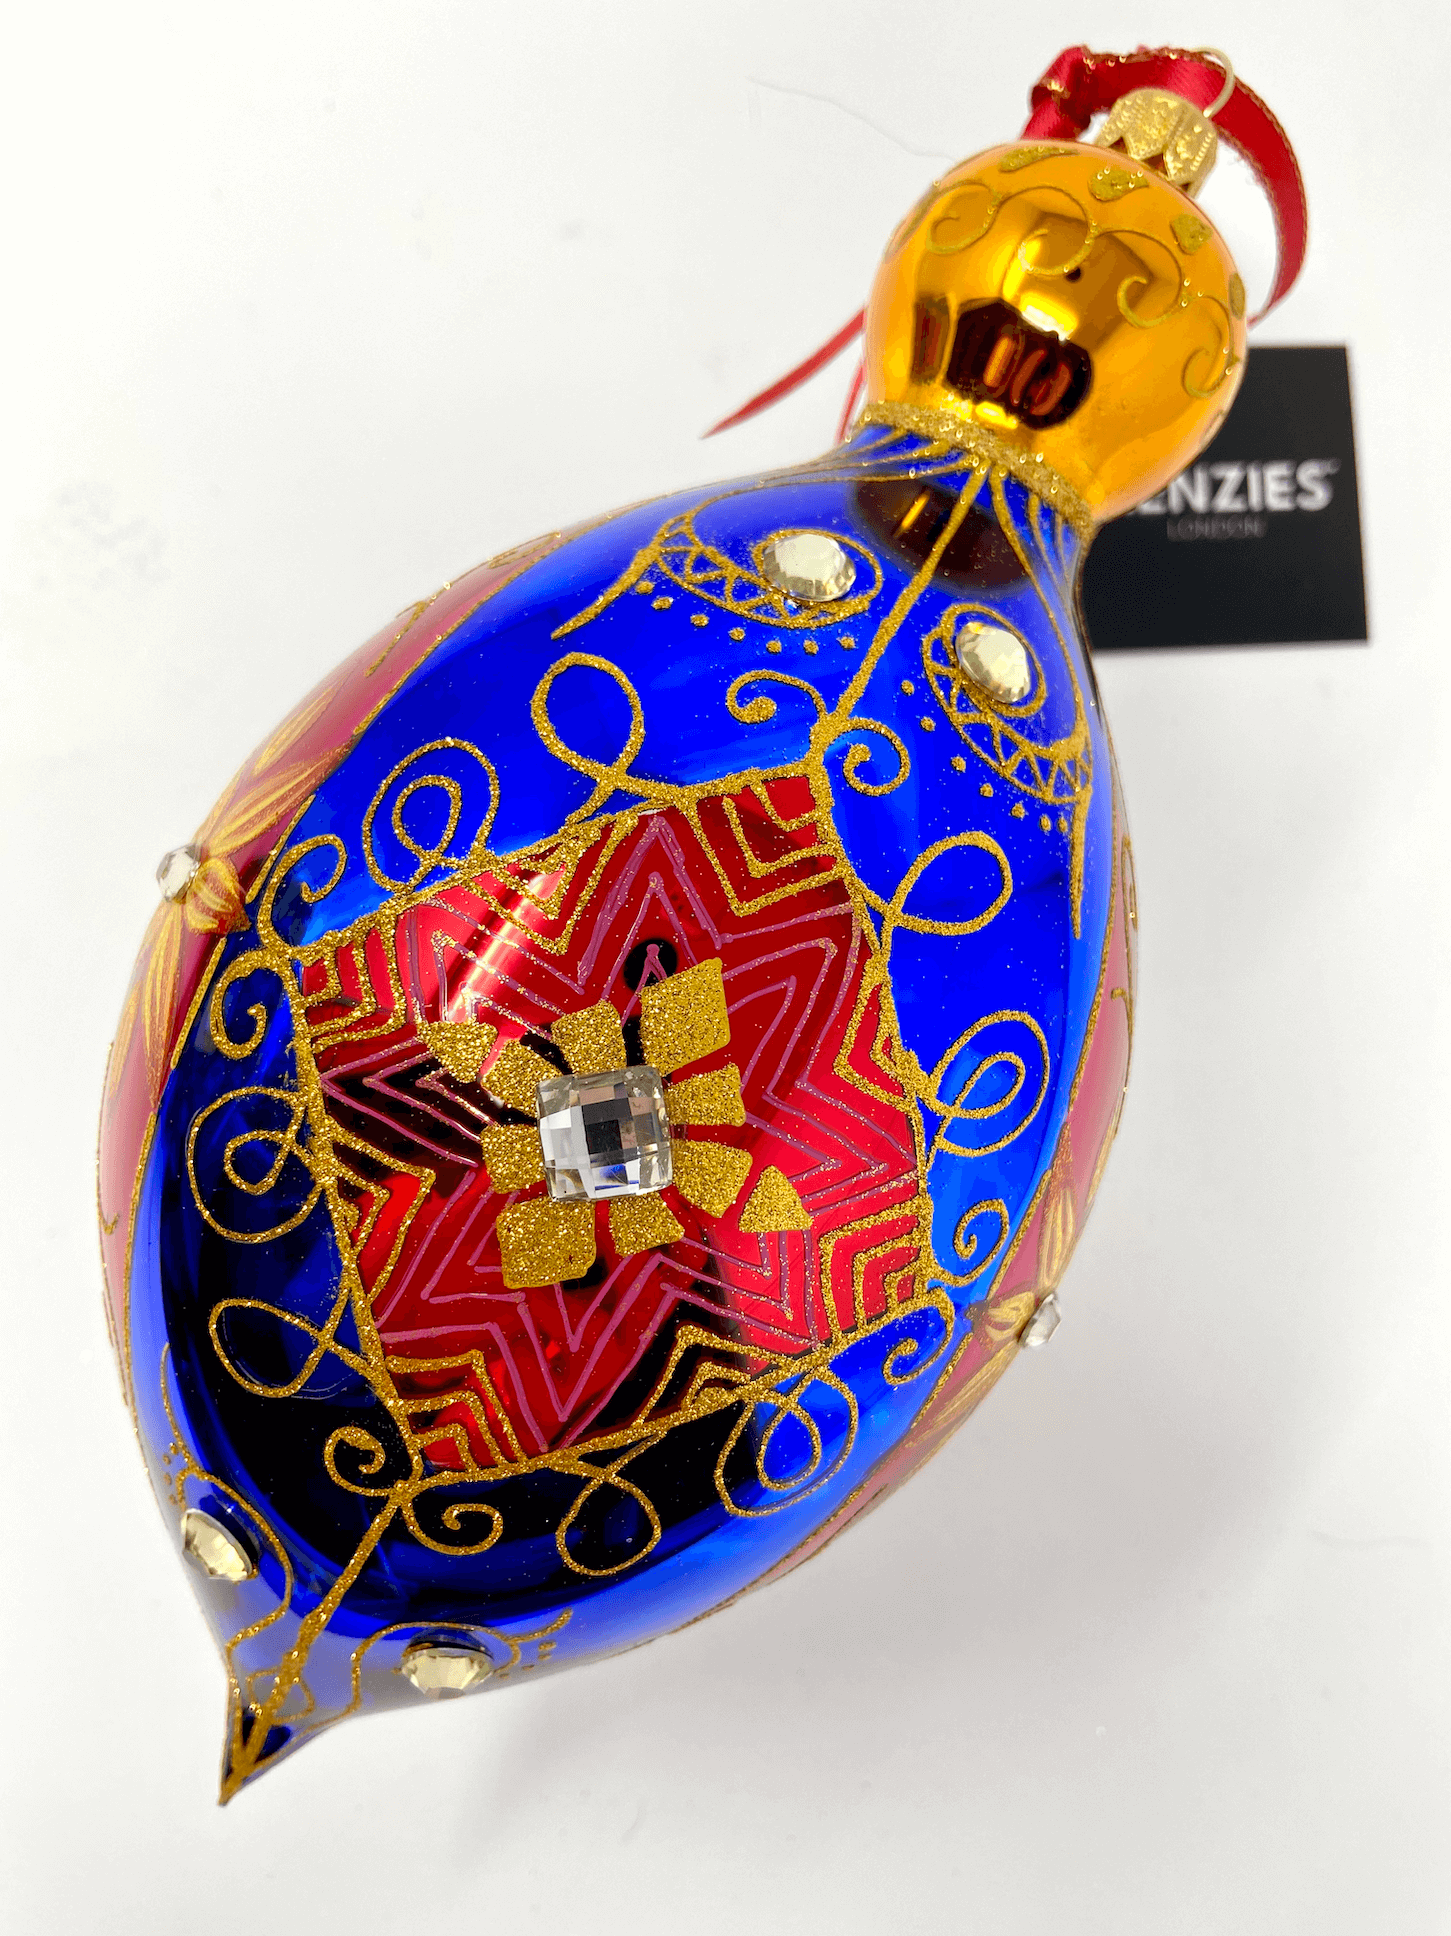 Generously oversized polish glass christmas ornament bauble decorated in blue and red stripes with gold damask detailing.